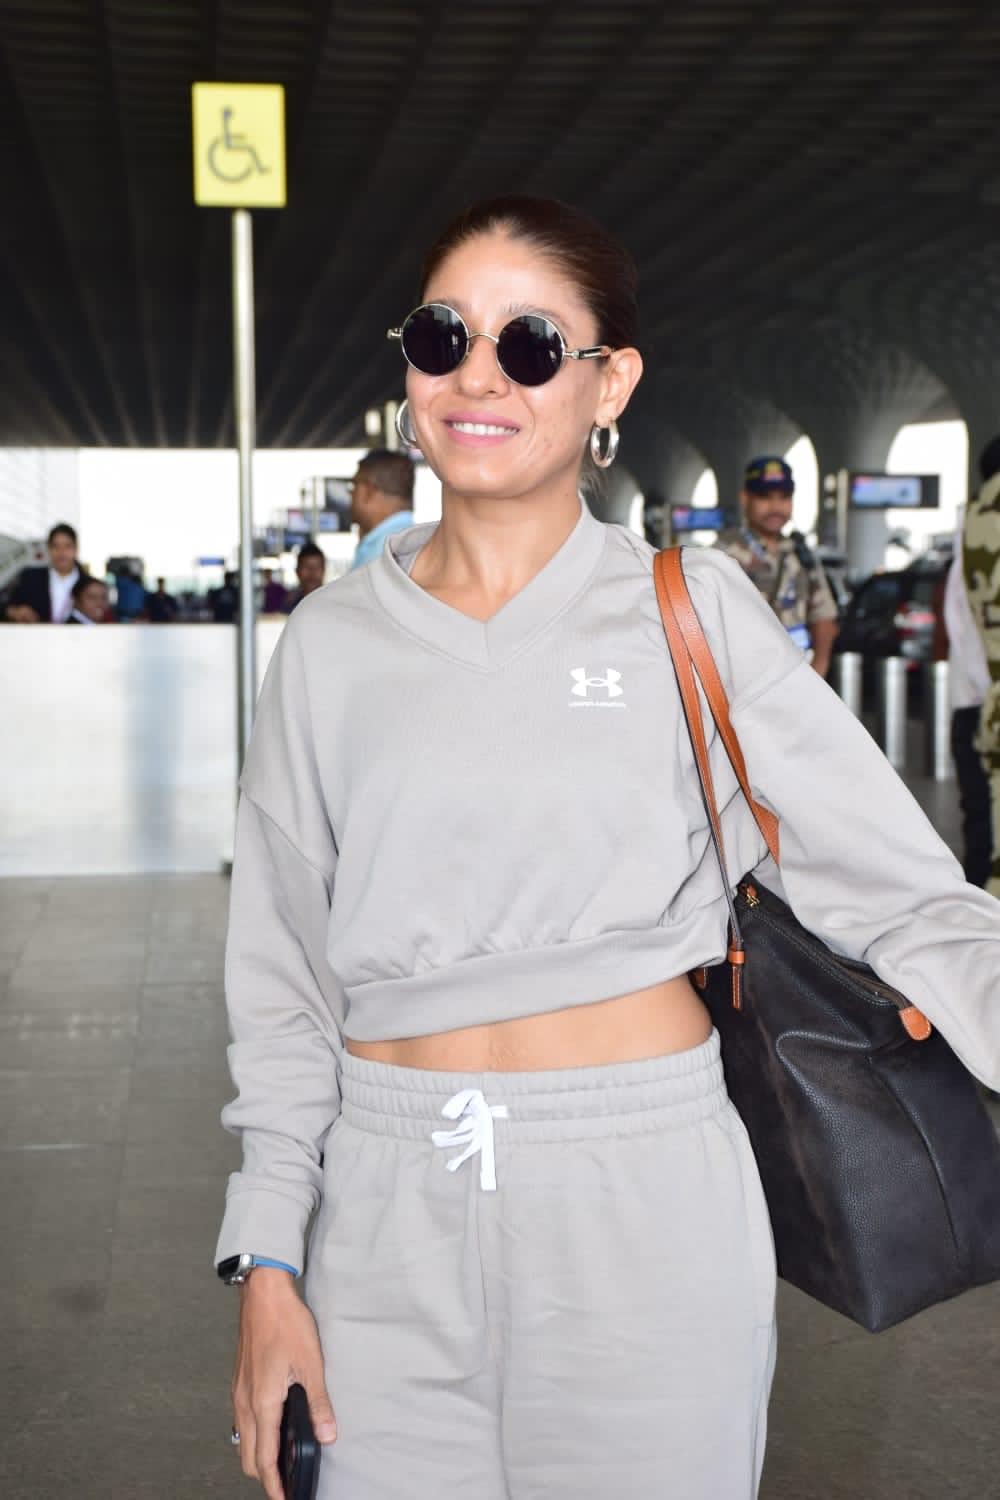 The singer was seen wearing a grey sweatshirt and sweatpants. She greeted the paps with a warm smile and posed for them before leaving.